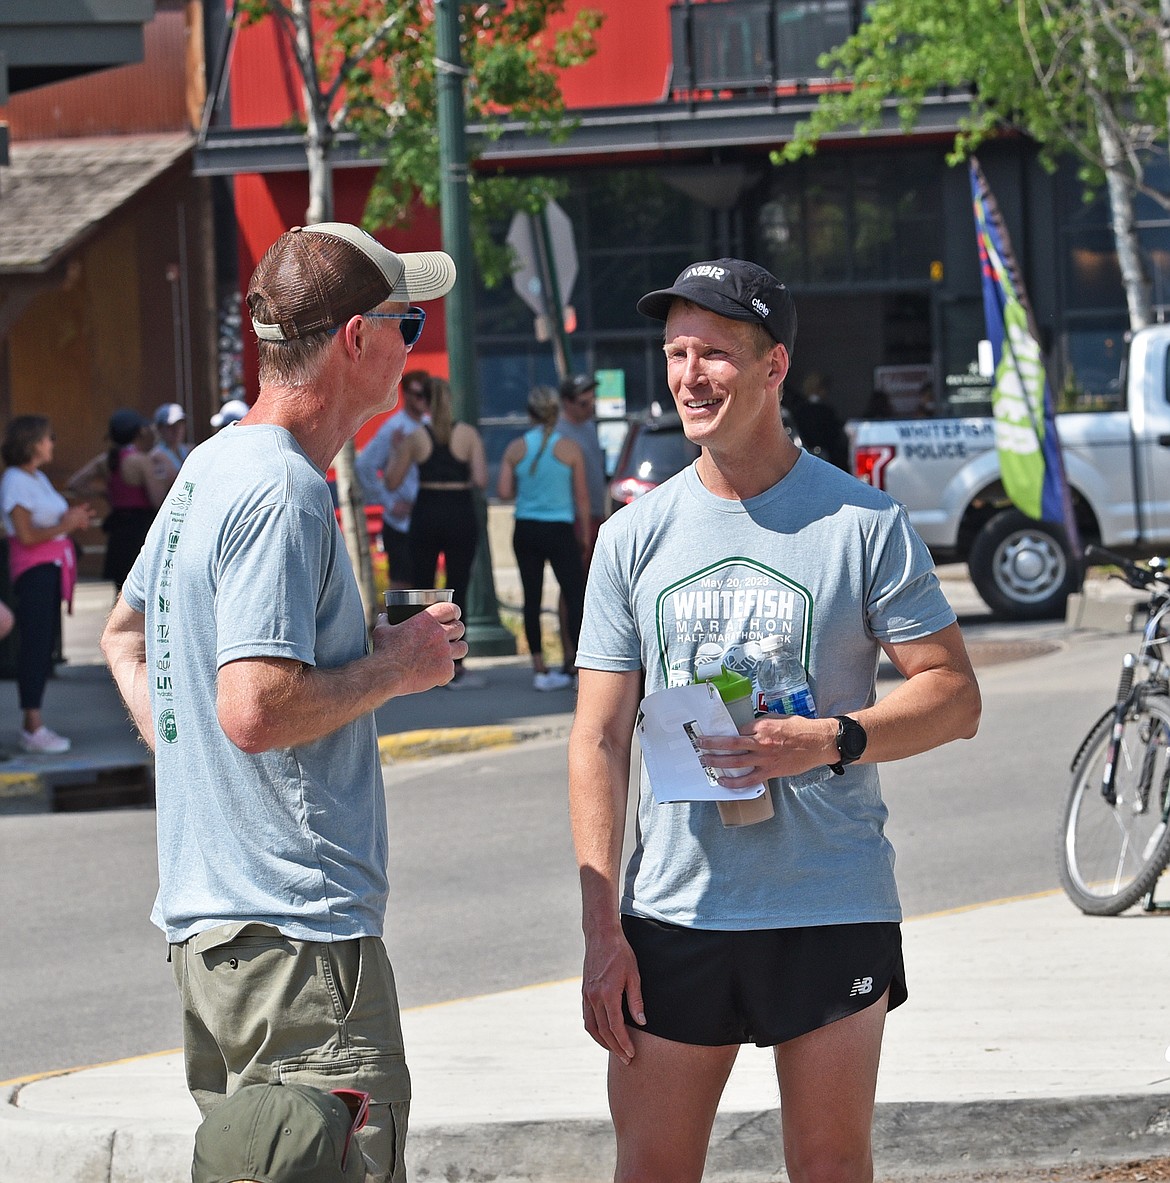 Michael Ortley, winner of the Whitefish Marathon, chats with a friend after the race. (Julie Engler/Whitefish Pilot)